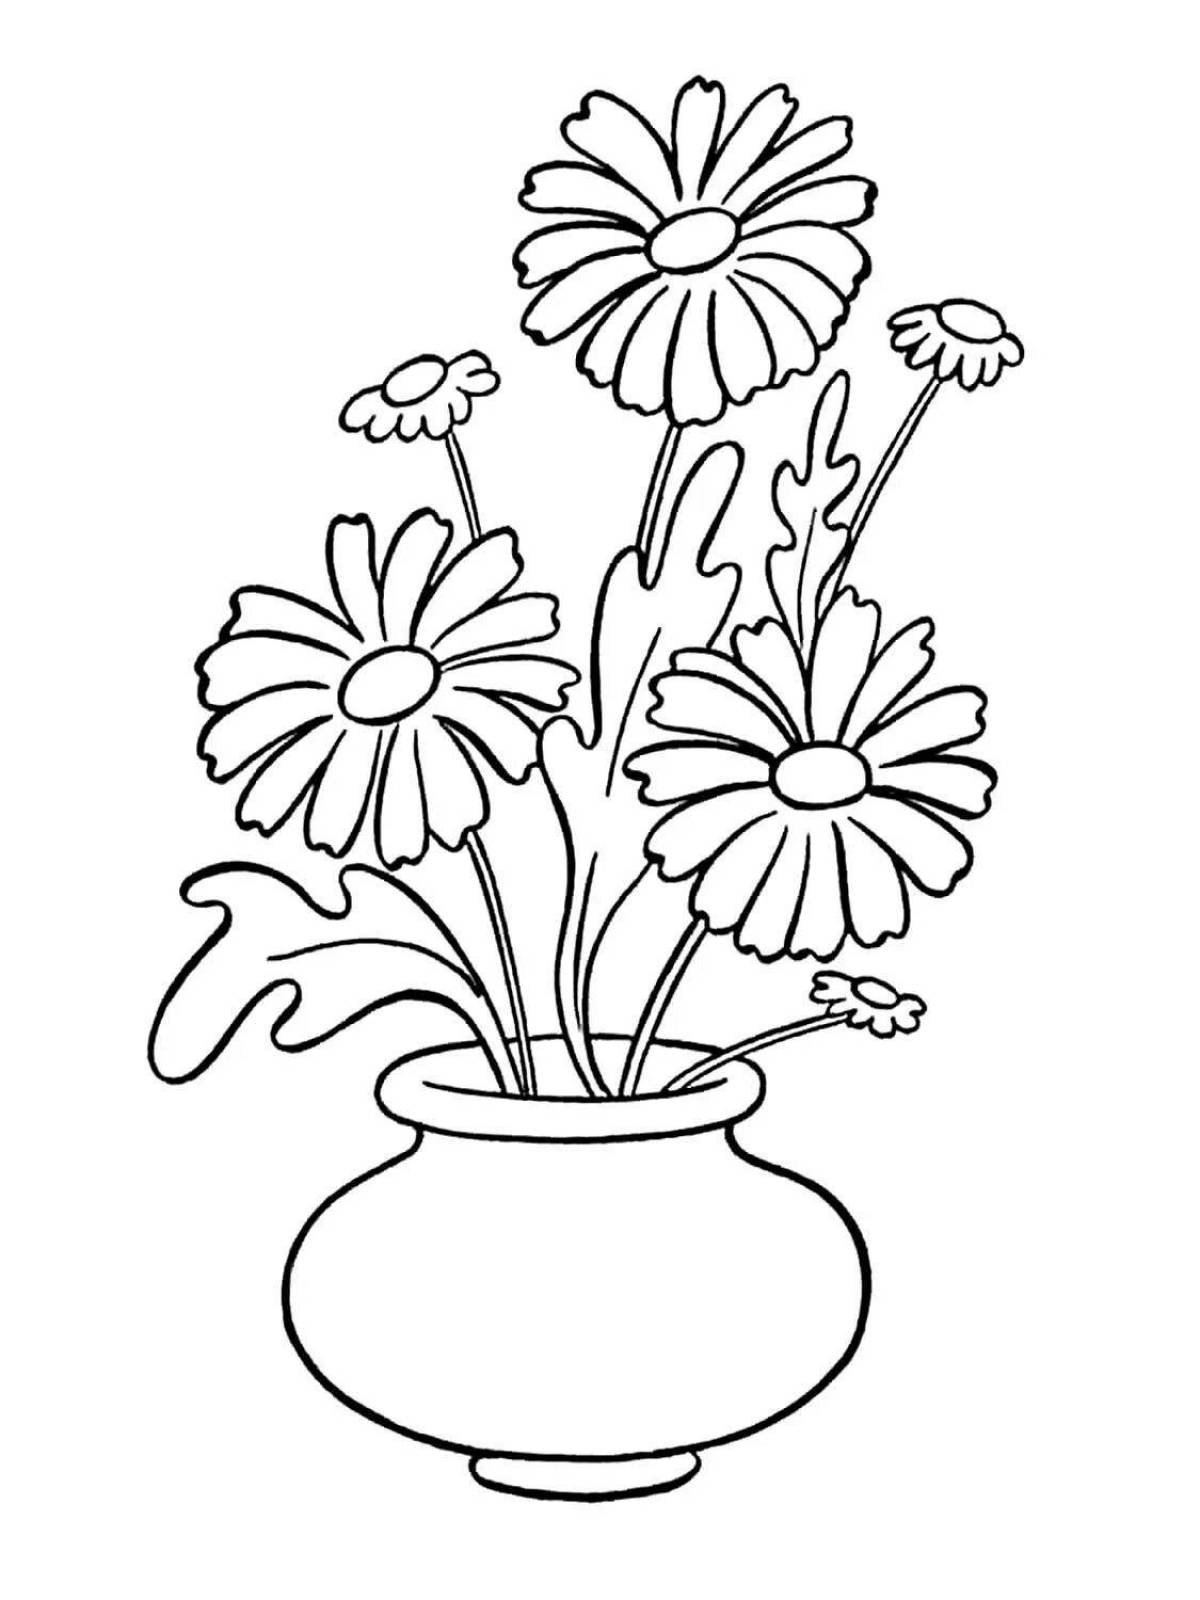 Dazzling bouquet of flowers in a vase coloring book